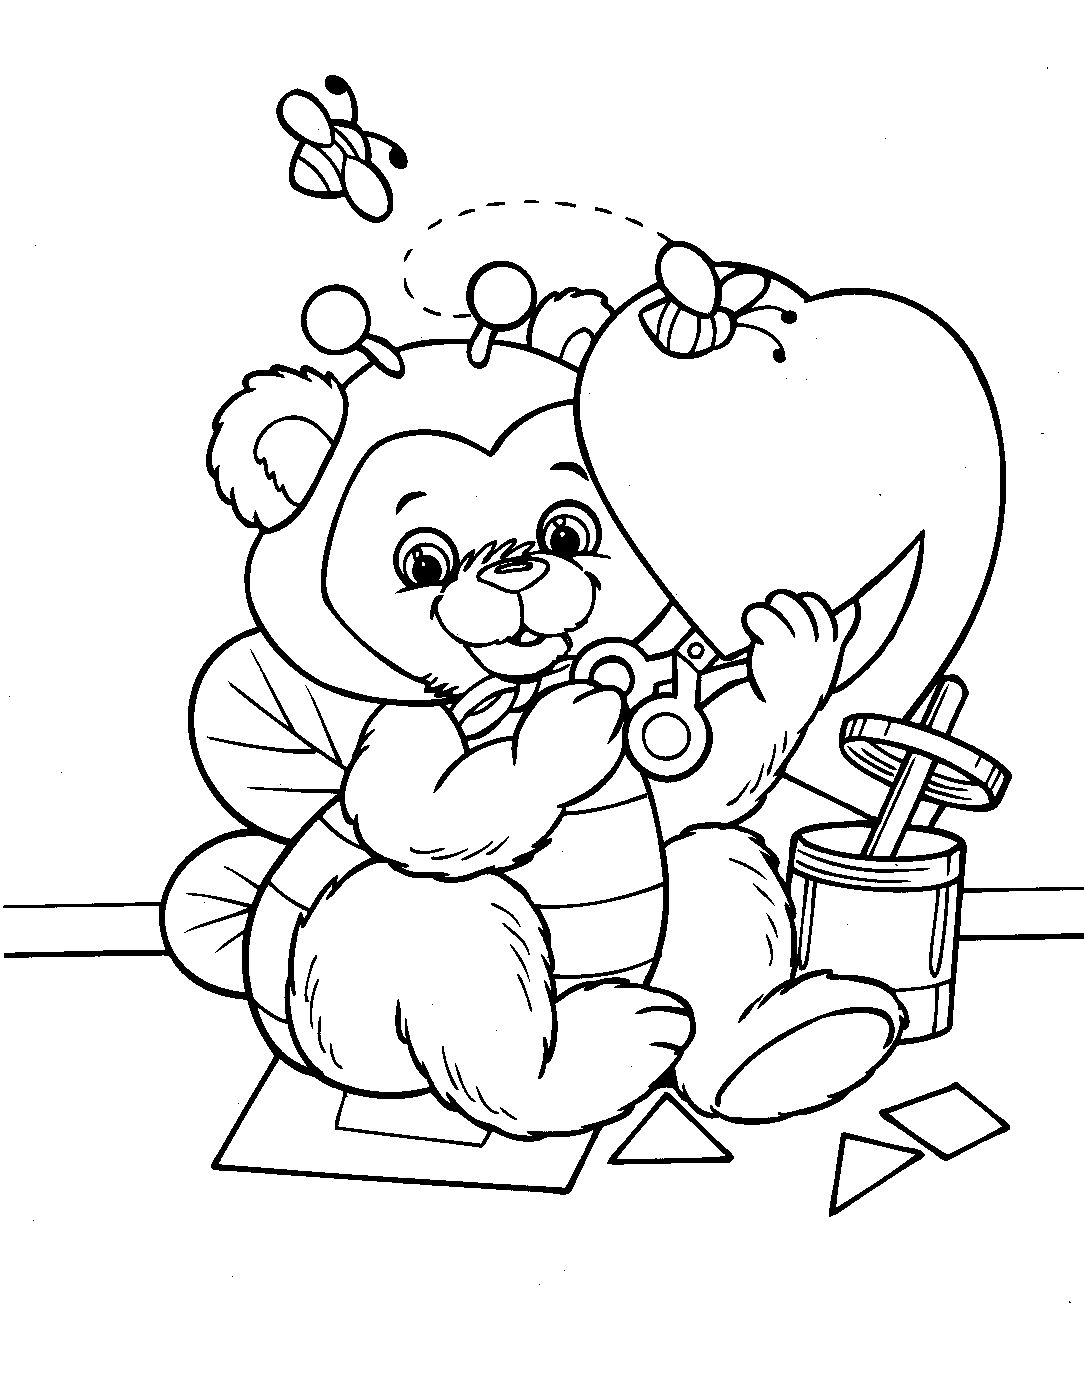 Printable Cute Valentines Coloring Pages For Adults Goimages Vip